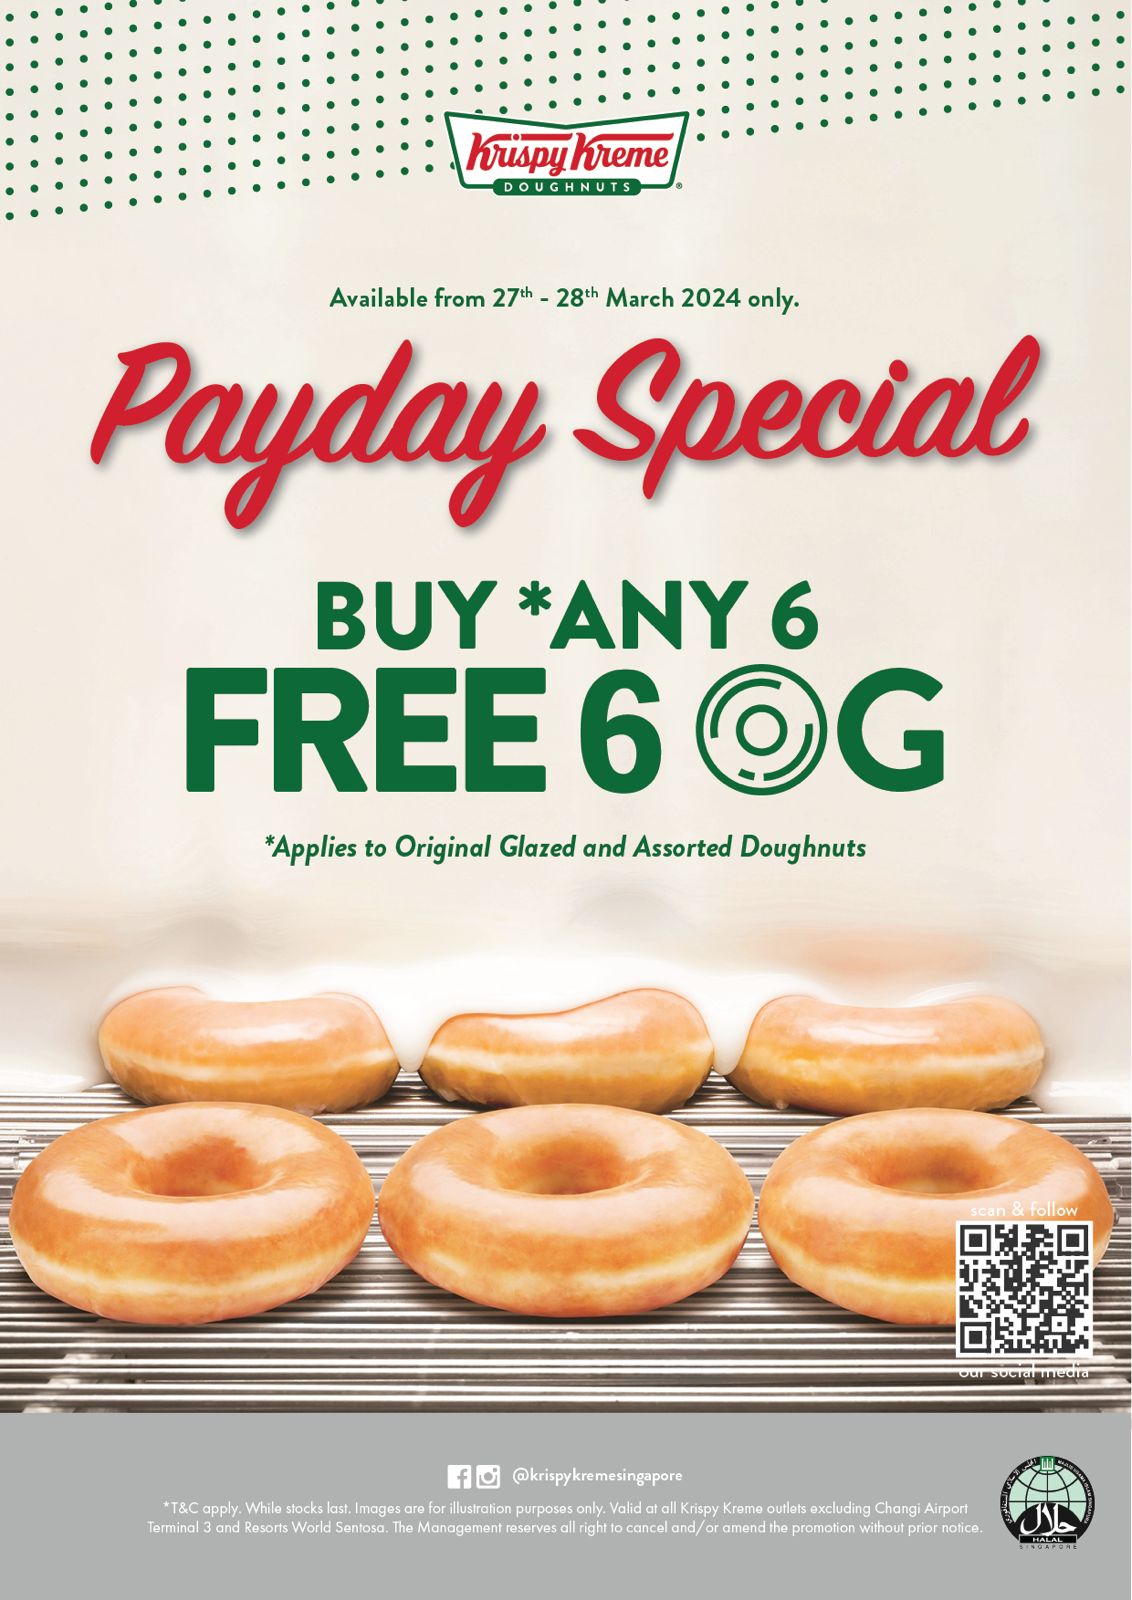 Lobang: Krispy Kreme is giving 6 FREE Original Glazed Doughnuts with any 6 doughnuts purchased from 27 - 28 Mar 24 - 5